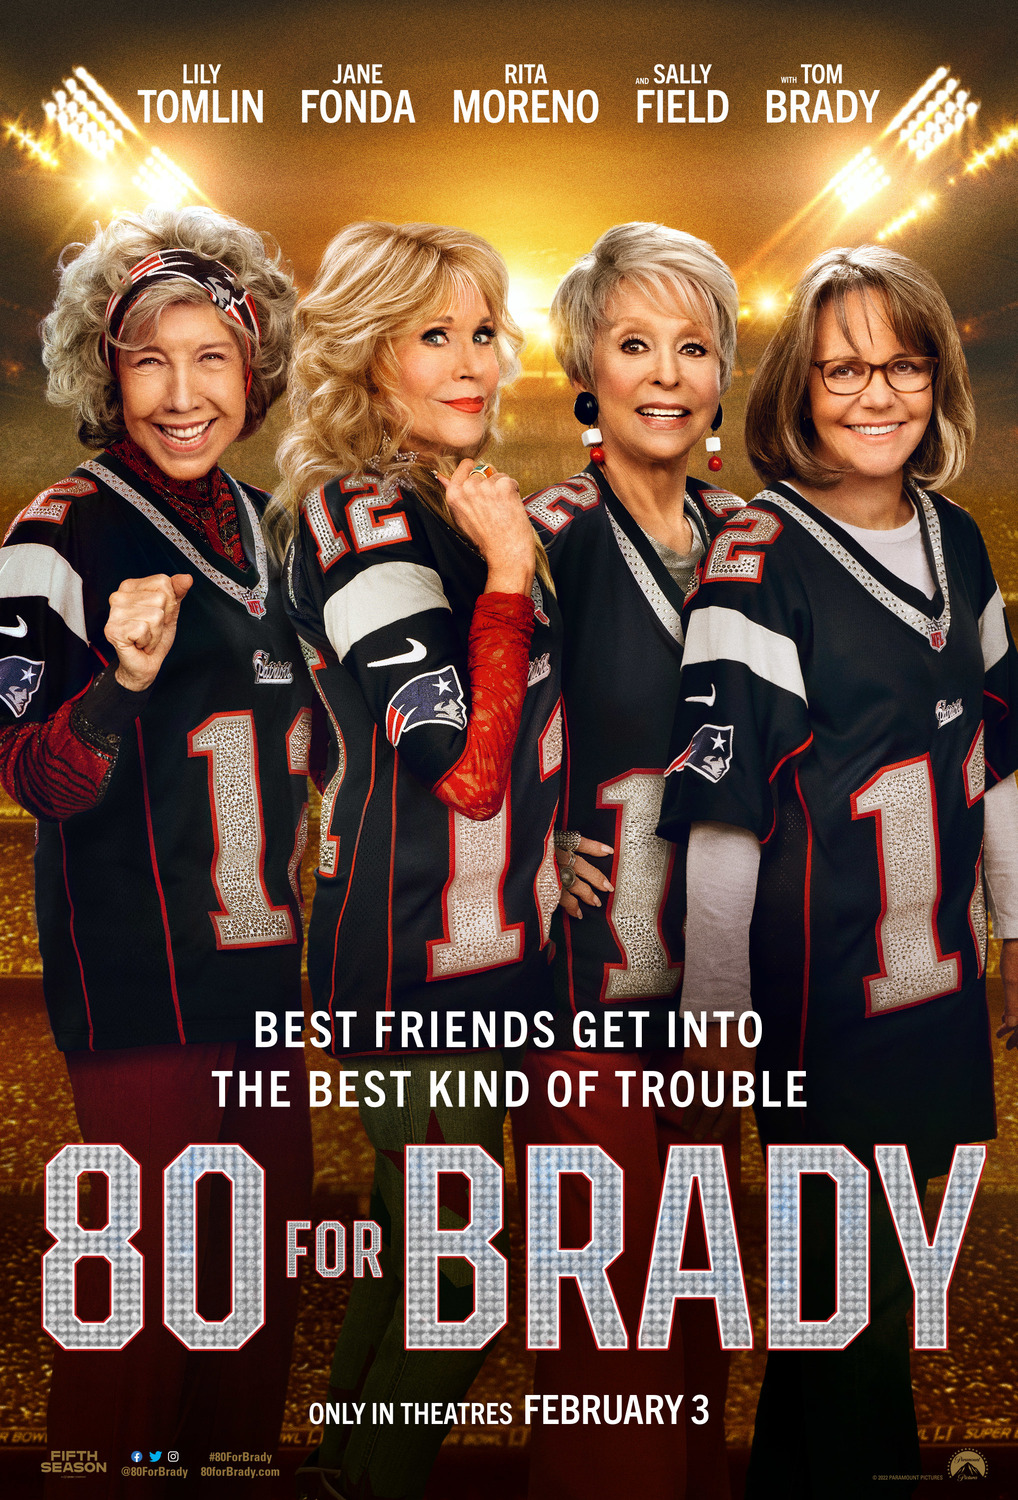 Extra Large Movie Poster Image for 80 for Brady 